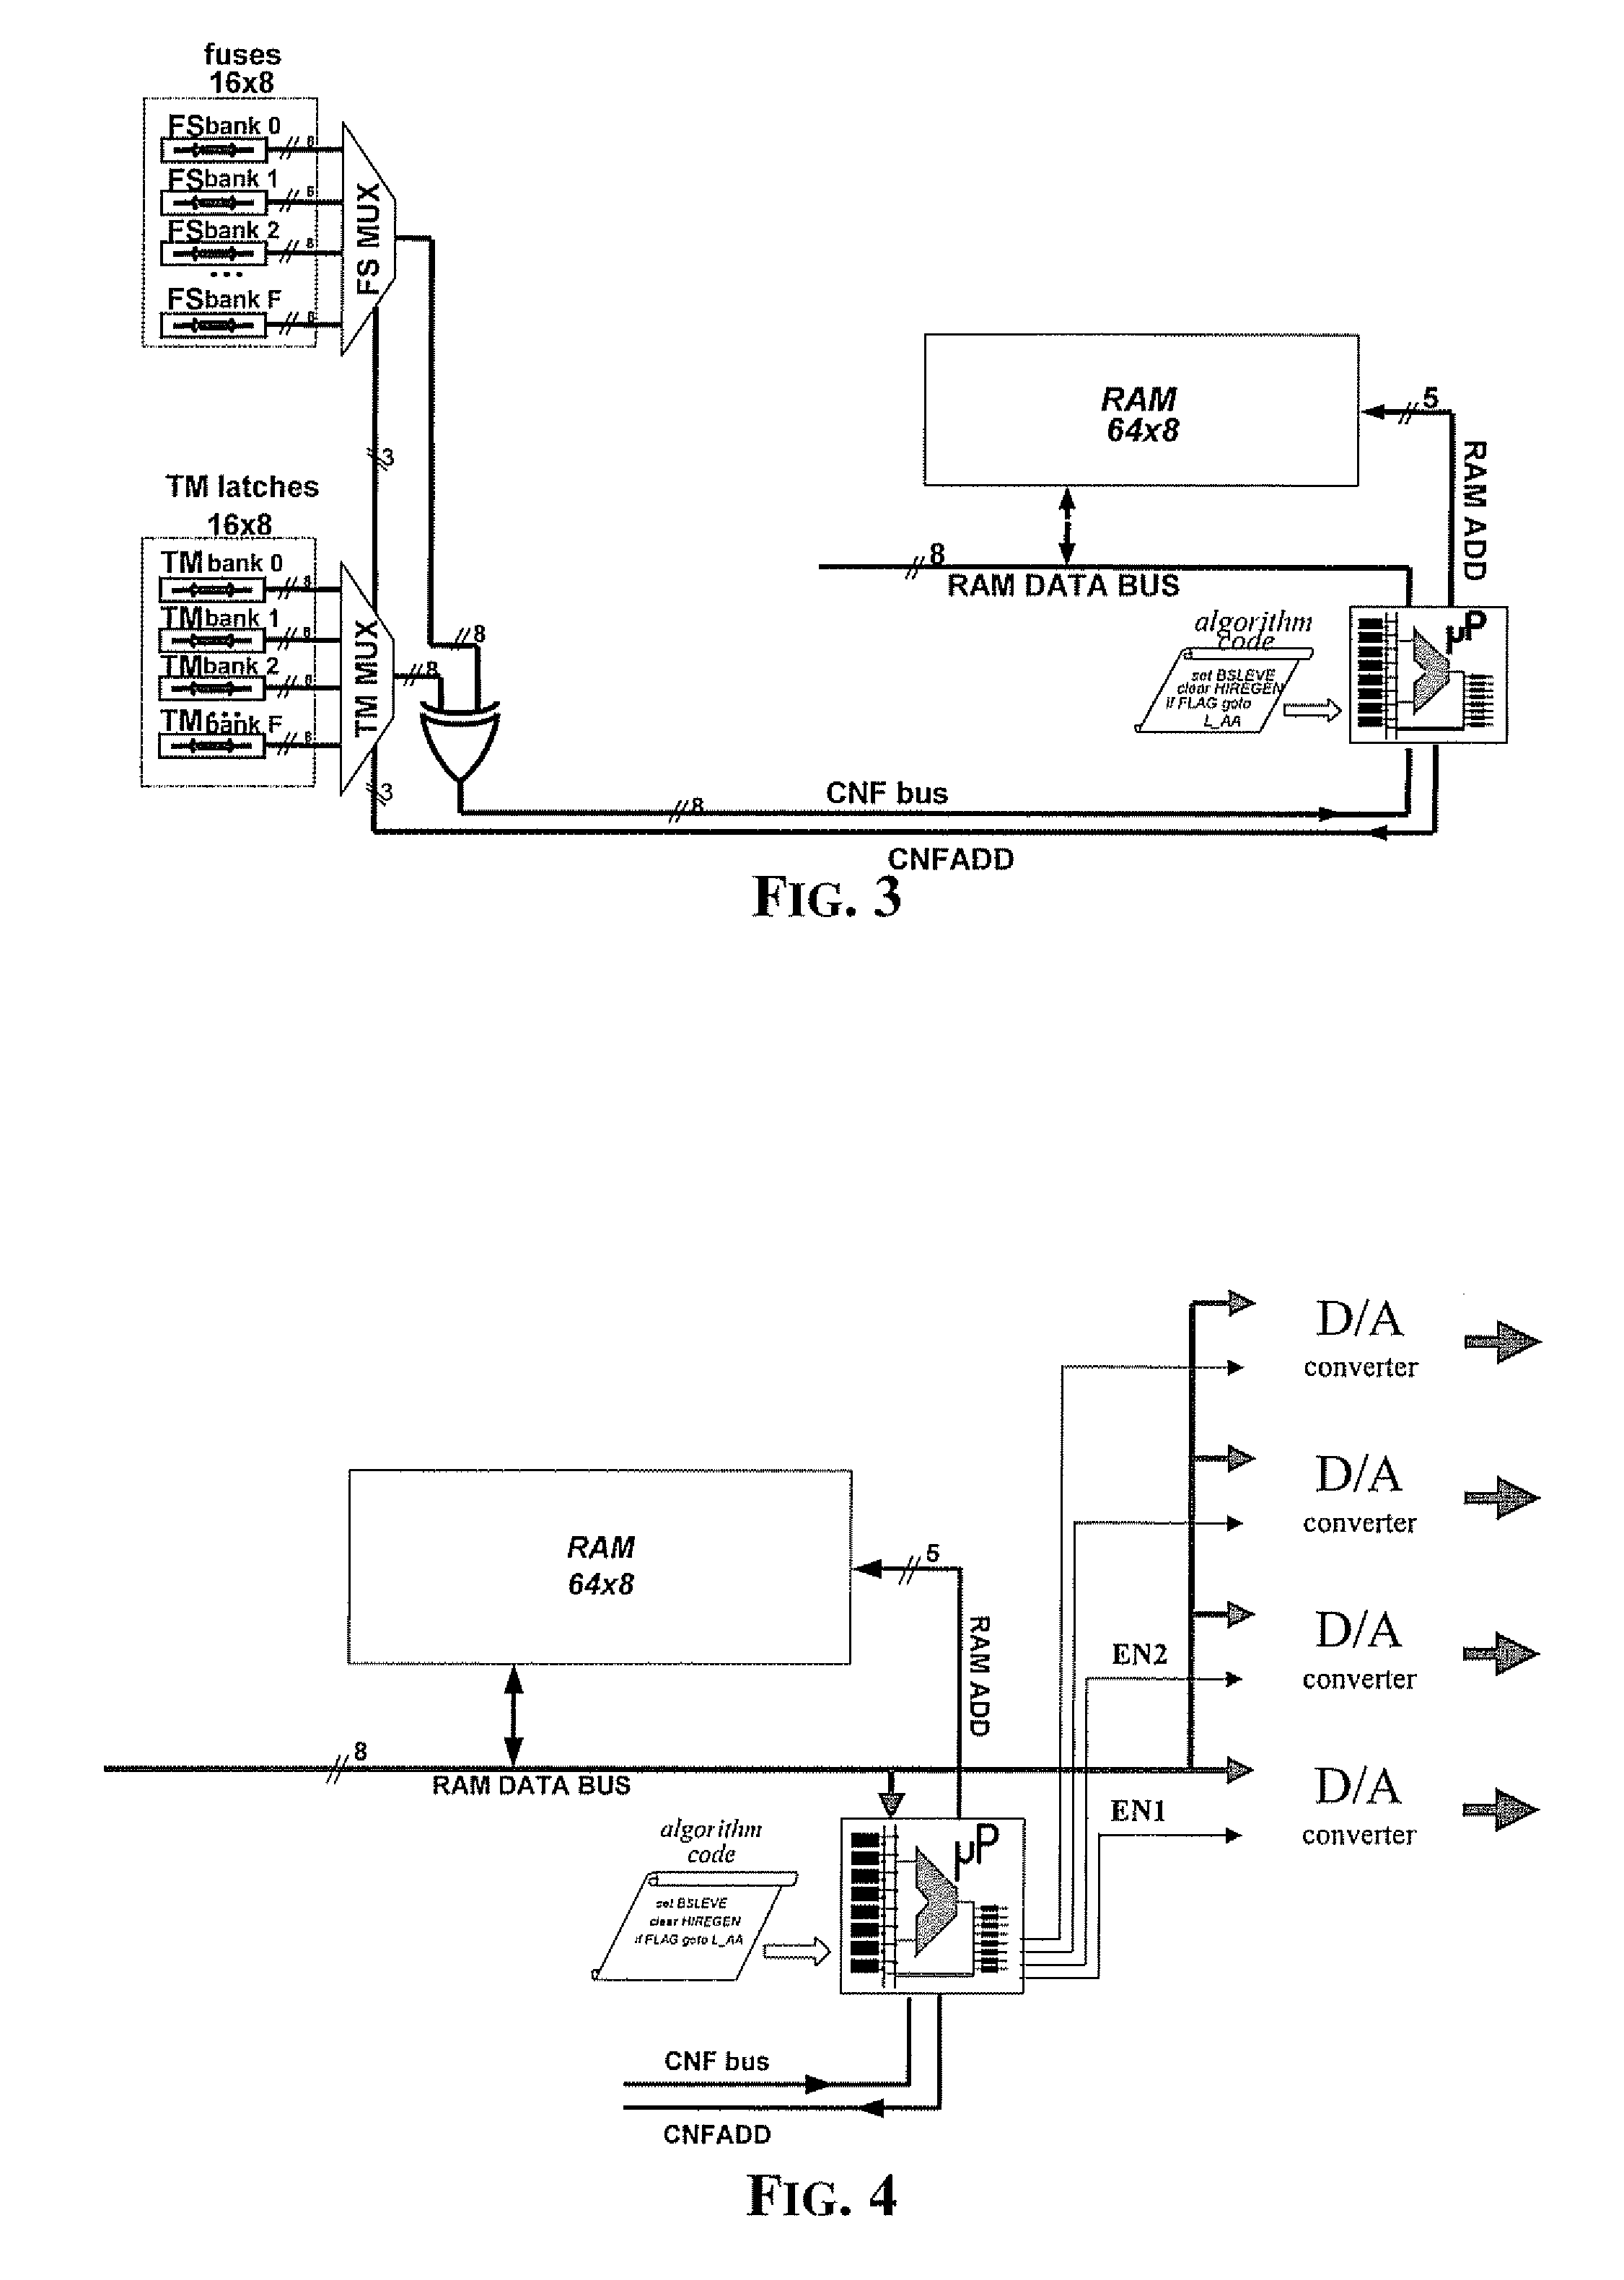 Configuration of a multilevel flash memory device